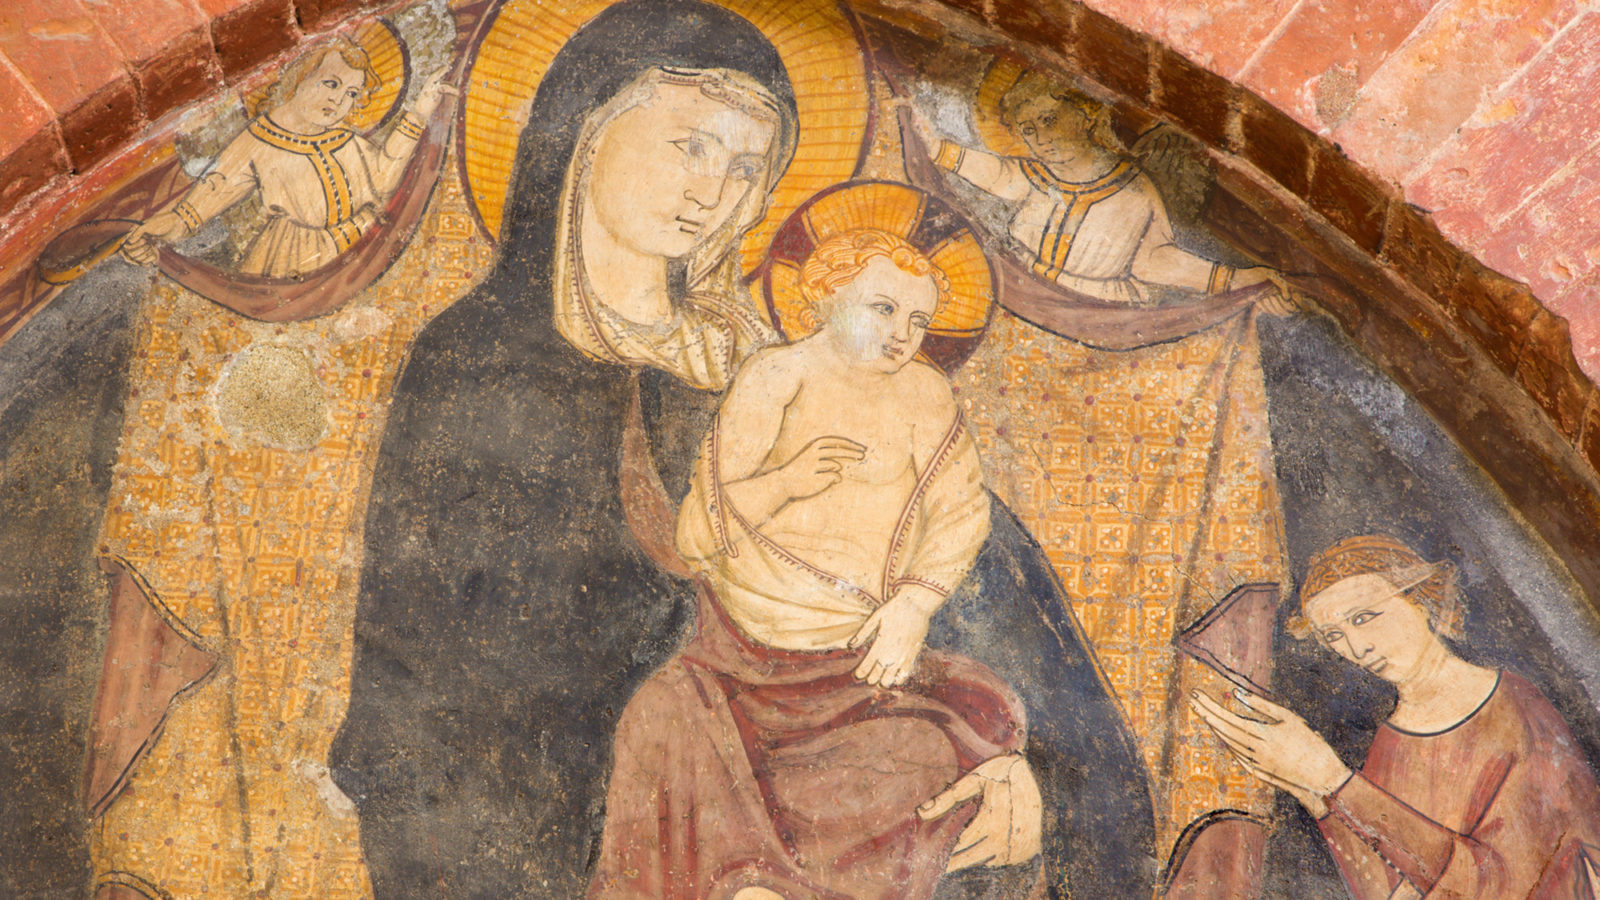 Medieval fresco of baby Jesus sitting on Mother Mary's lap with two angels above them and a woman with her arms outstretched below